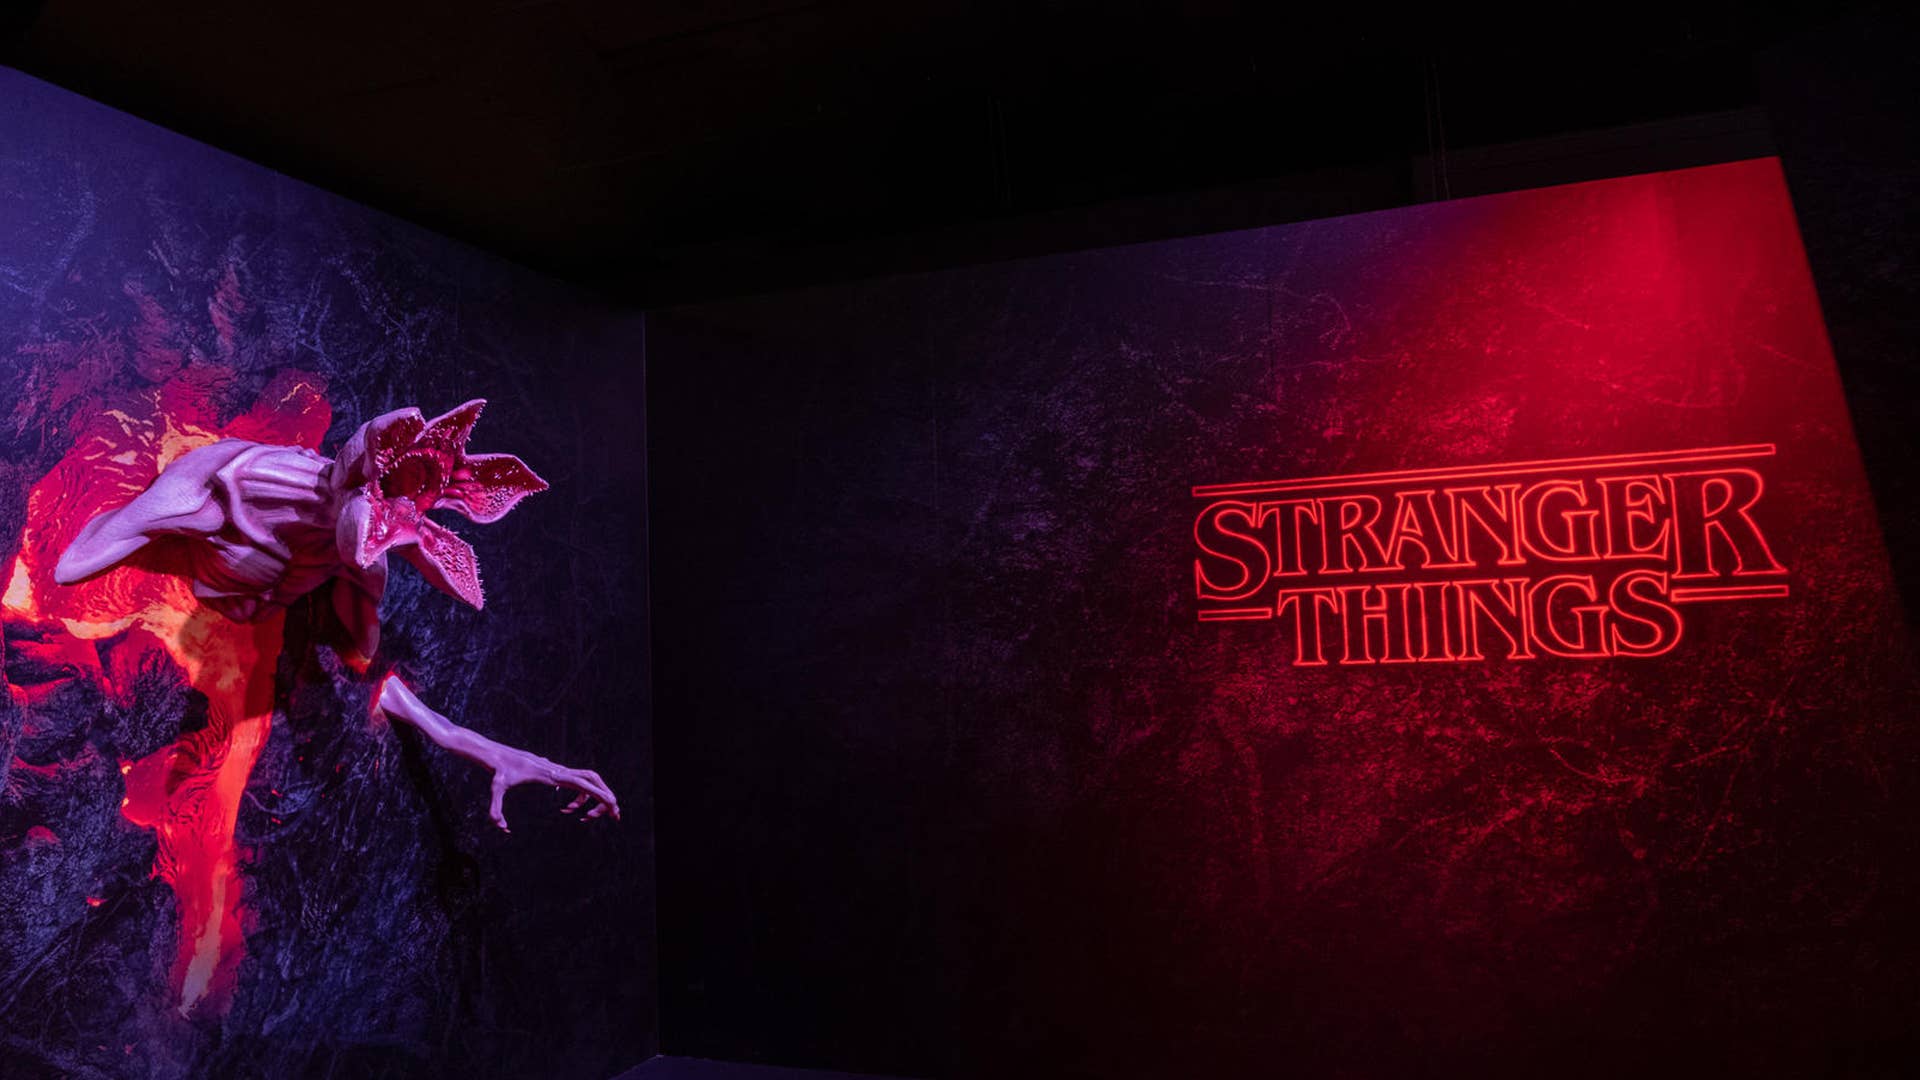 The pop-up store for Netflix's 'Stranger Things' day celebration.